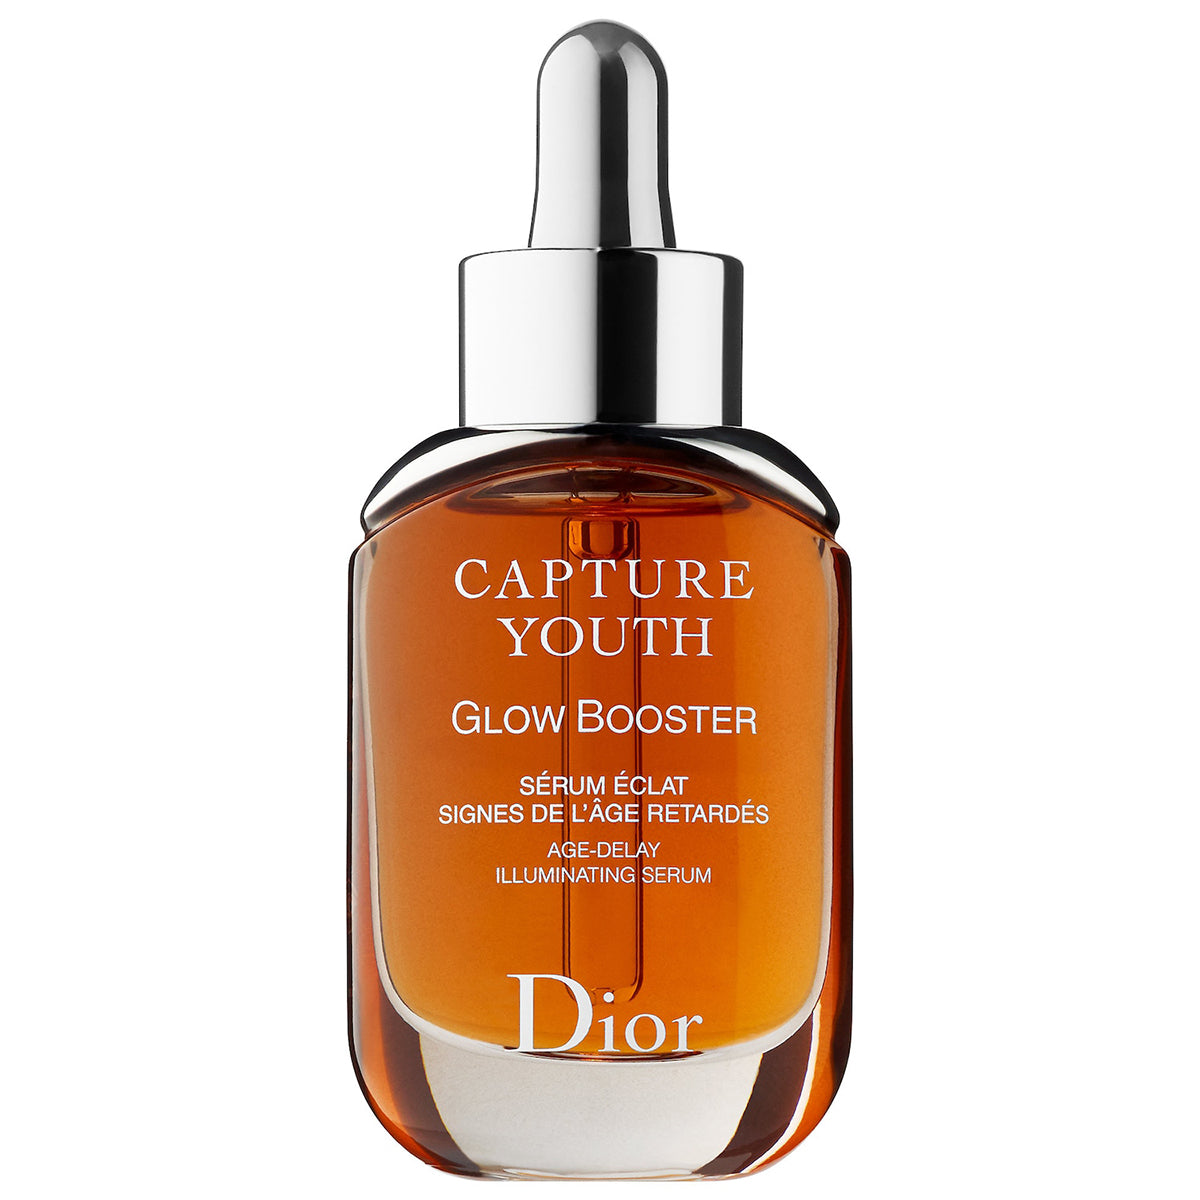 dior serum glow booster review